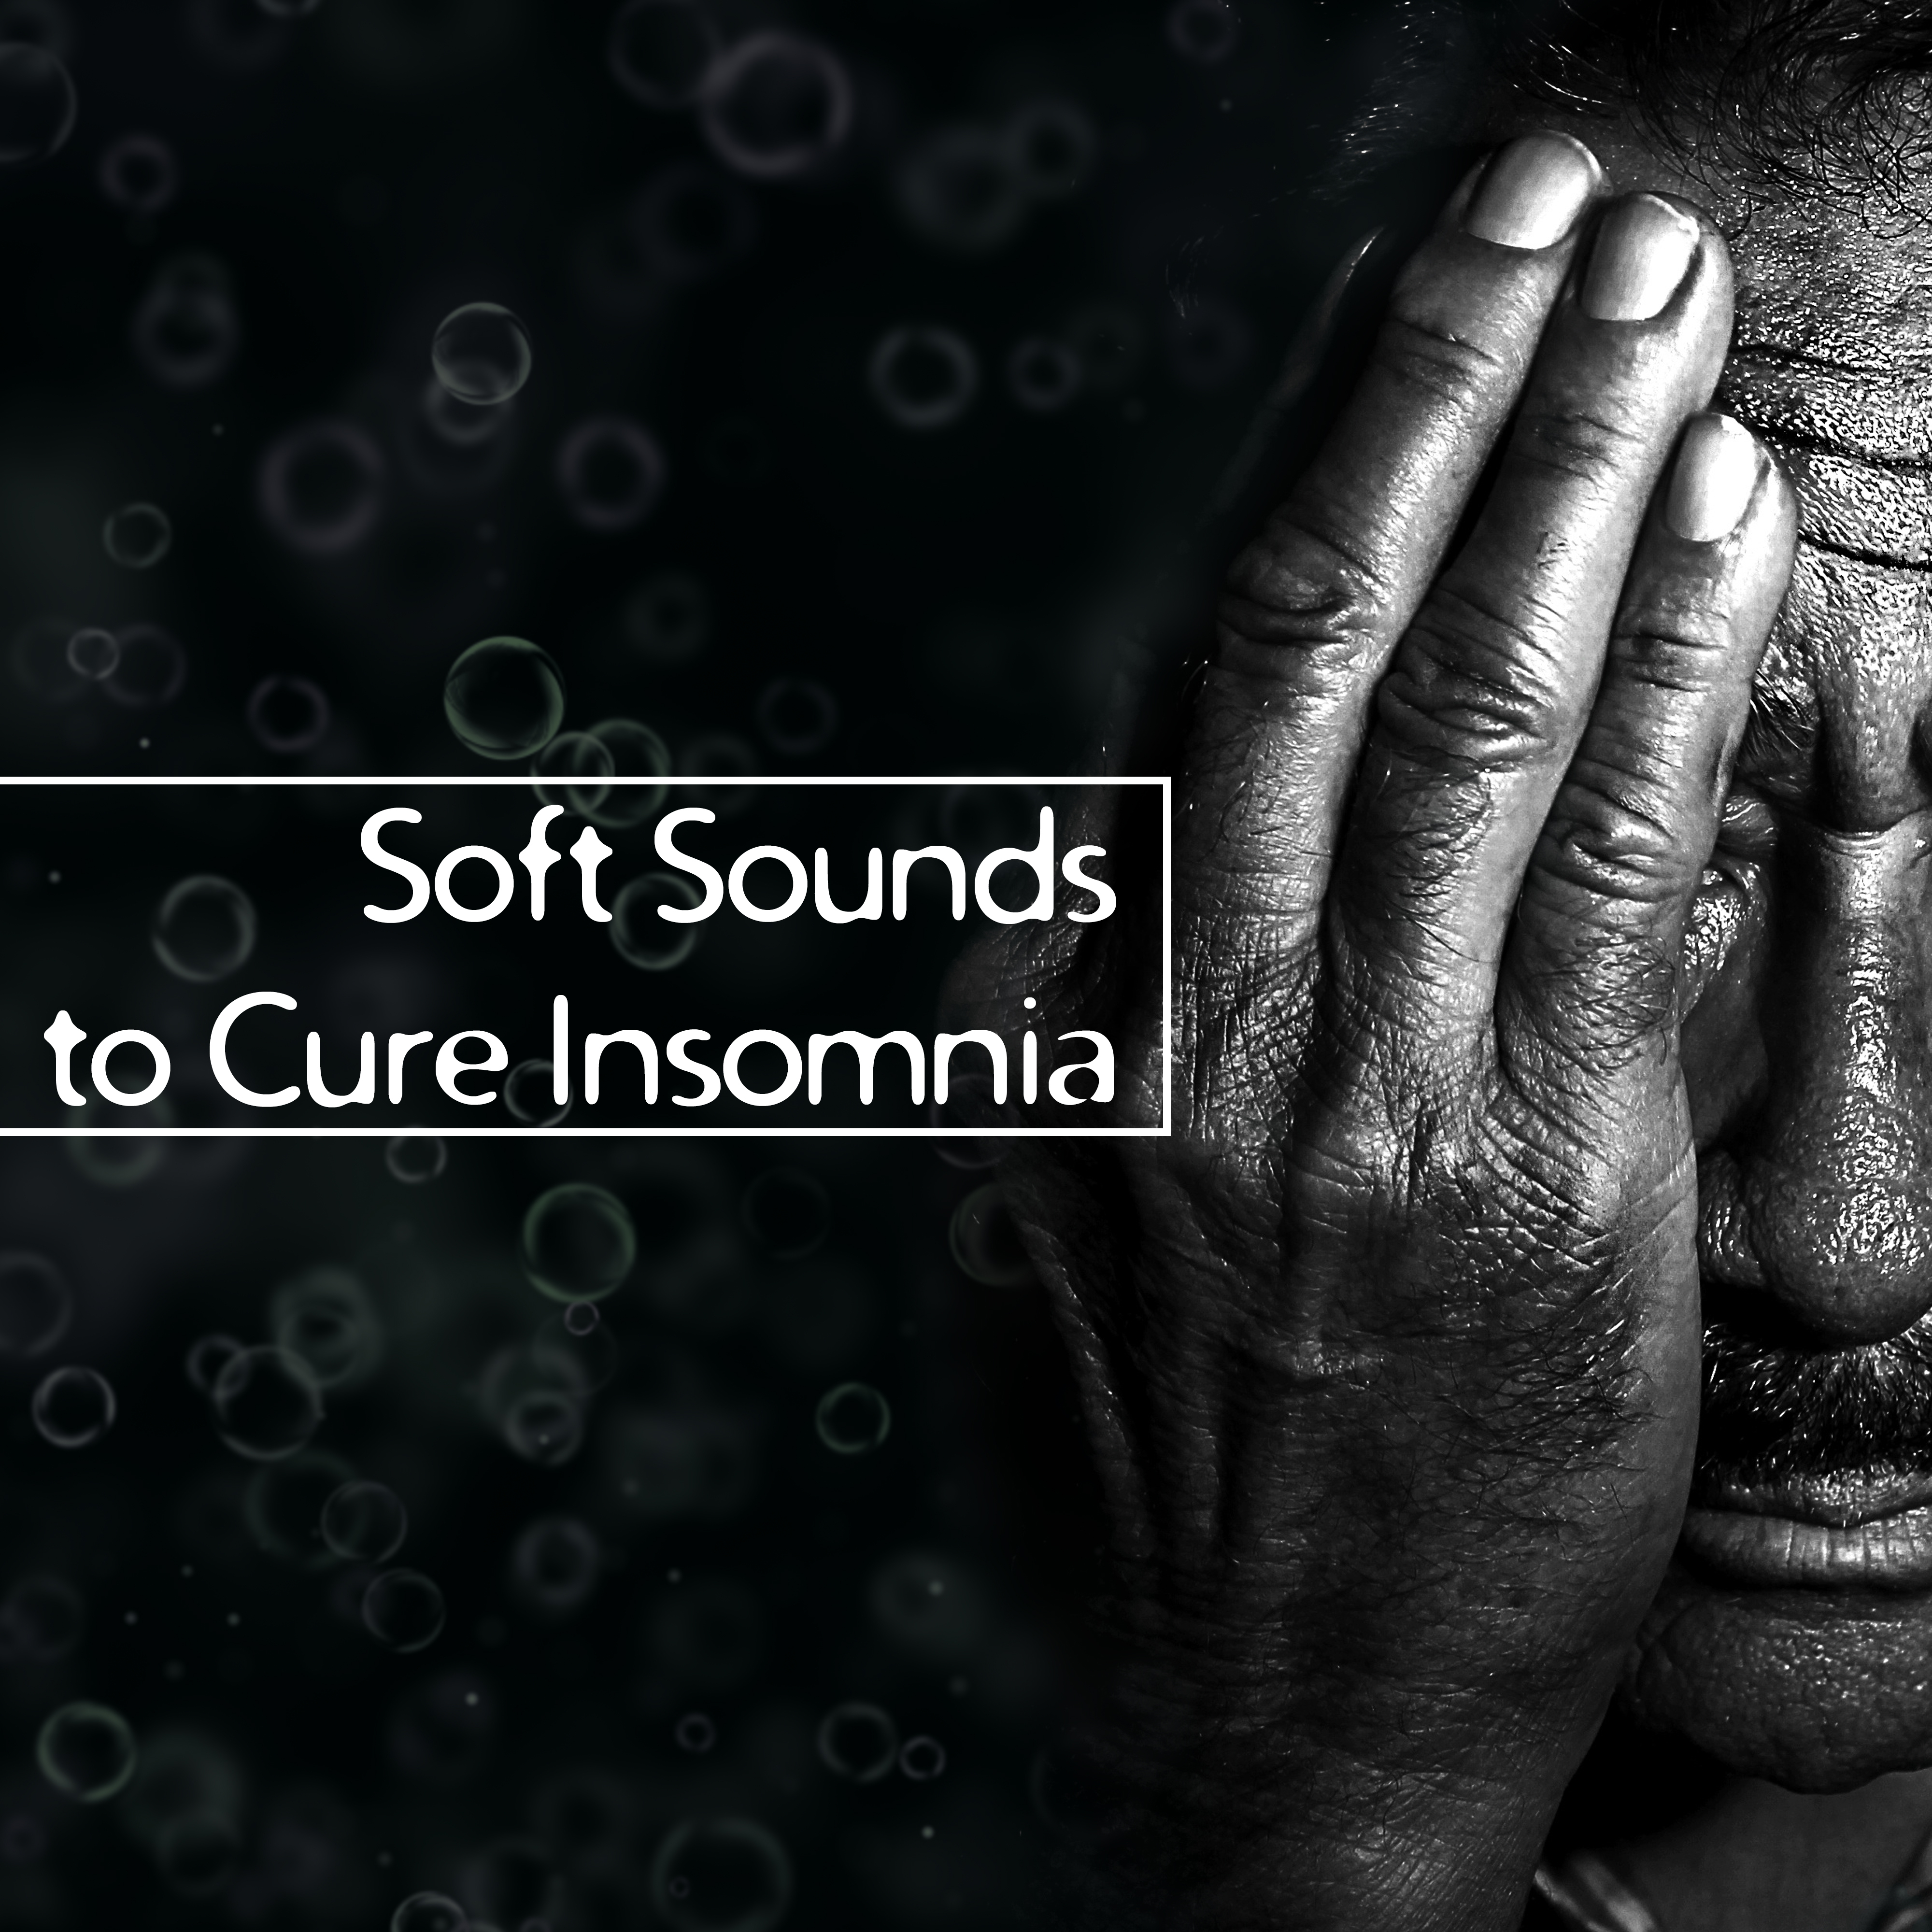 Soft Sounds to Cure Insomnia – Relaxing & Healing Waves, New Age Sleep Music, Sounds to Calm Mind & Body